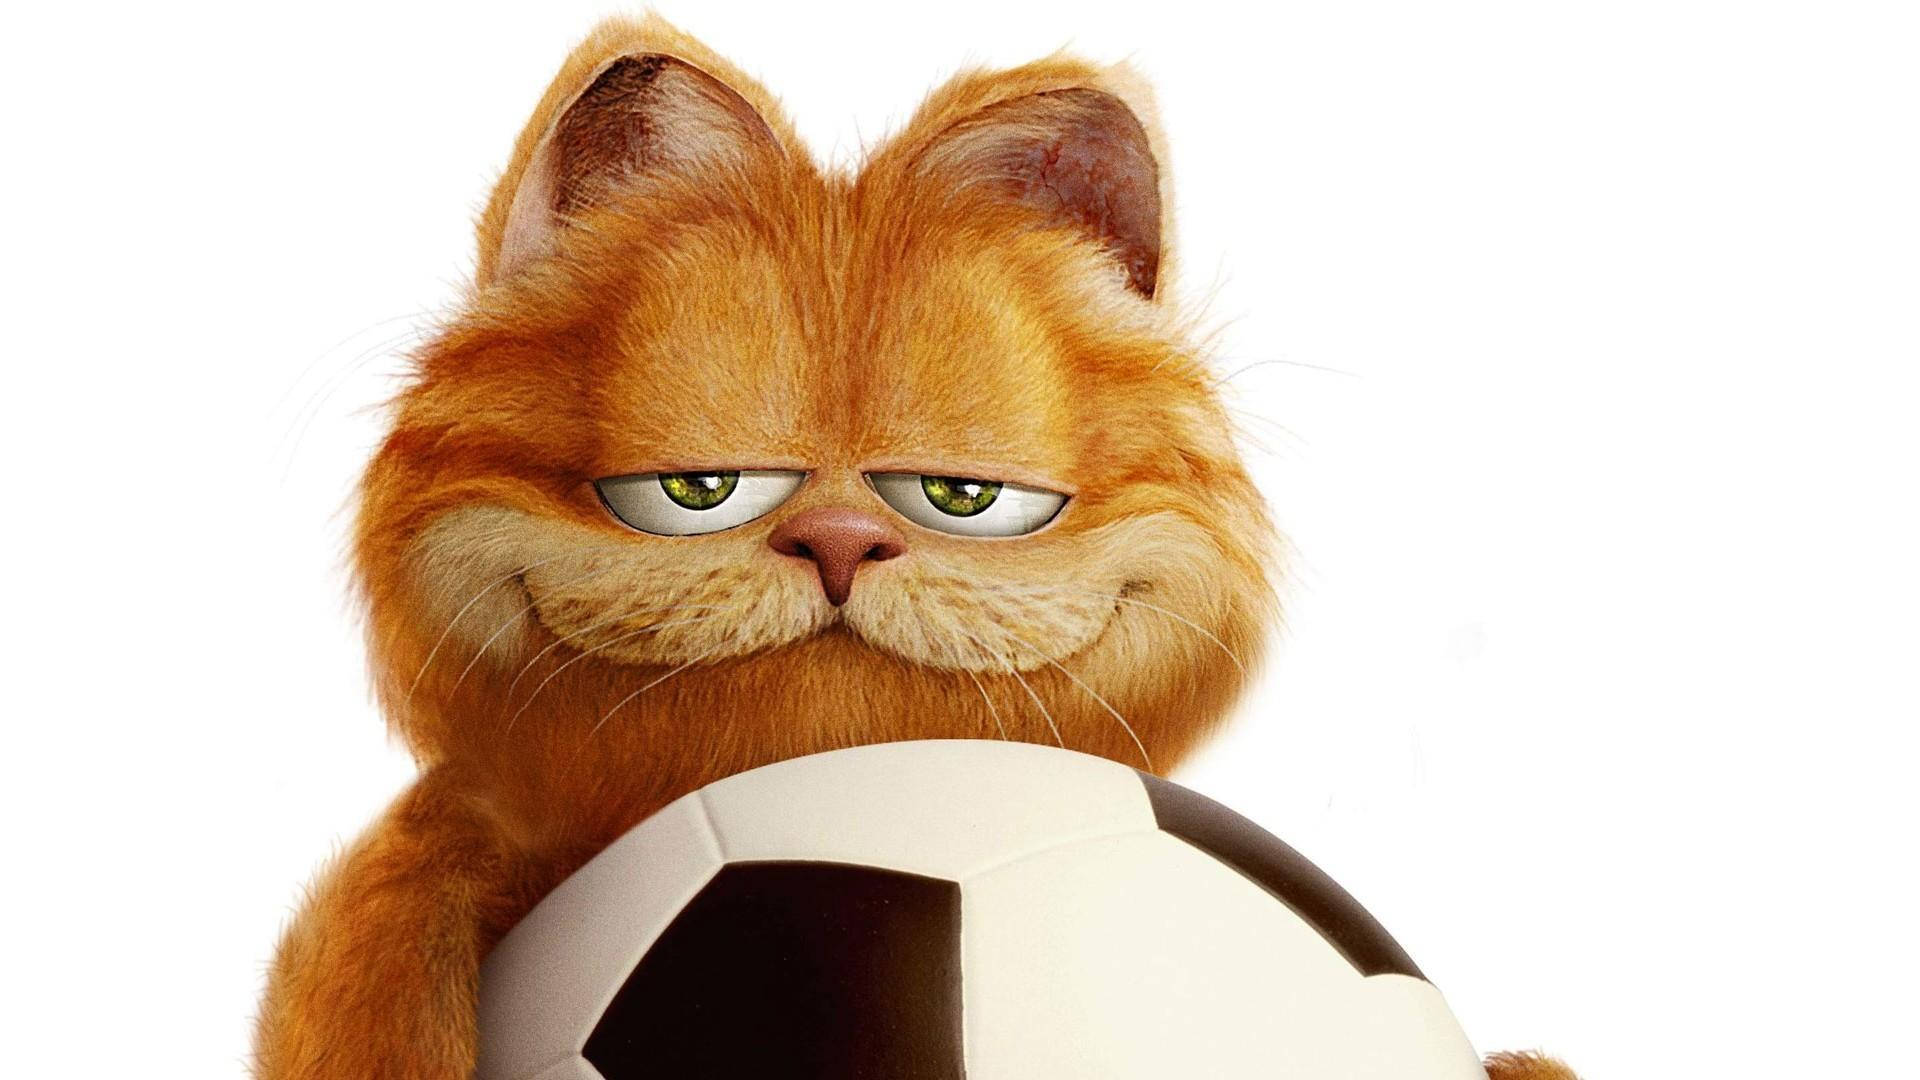 Caption: Garfield The Cat Enjoys Playing Football Background